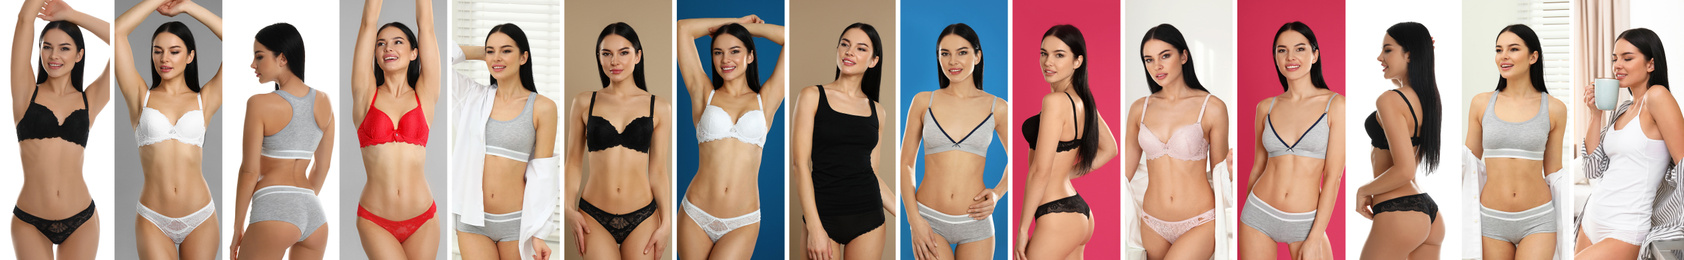 Collage of young woman in underwear on color backgrounds. Banner design 